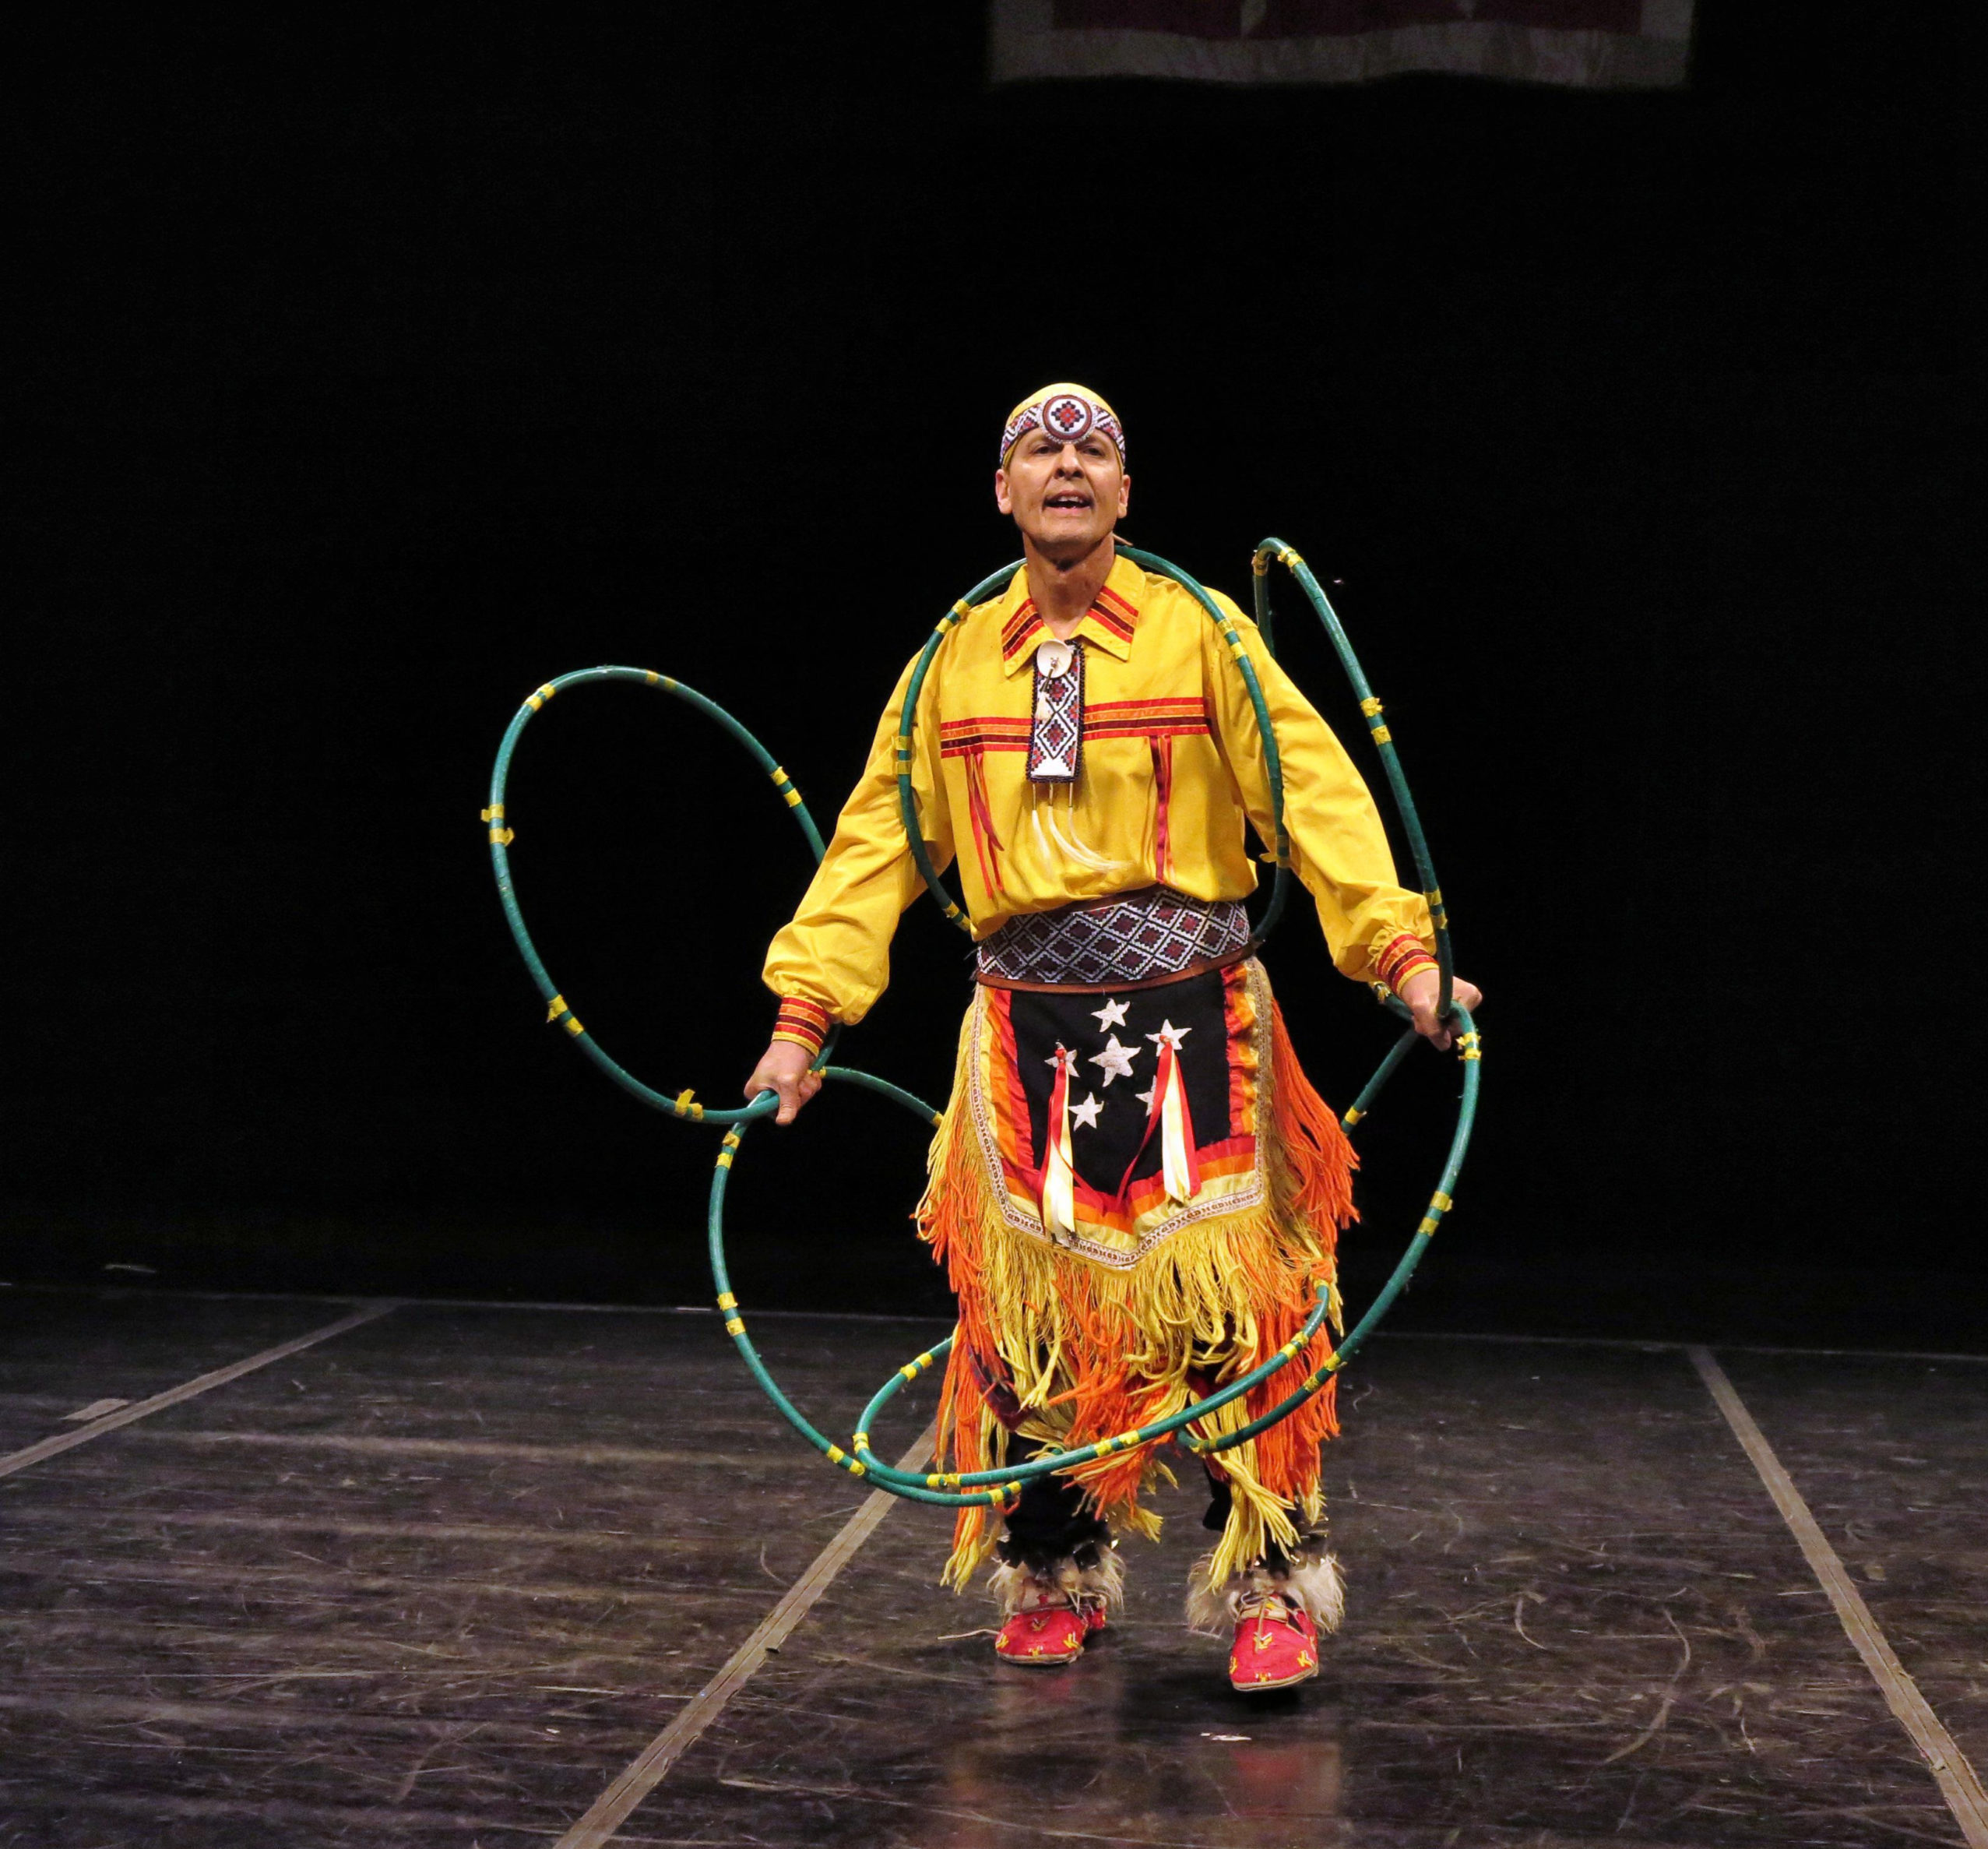 Michael Taylor, wearing a traditional yellow costume with red and black details, performs a hoop dance.